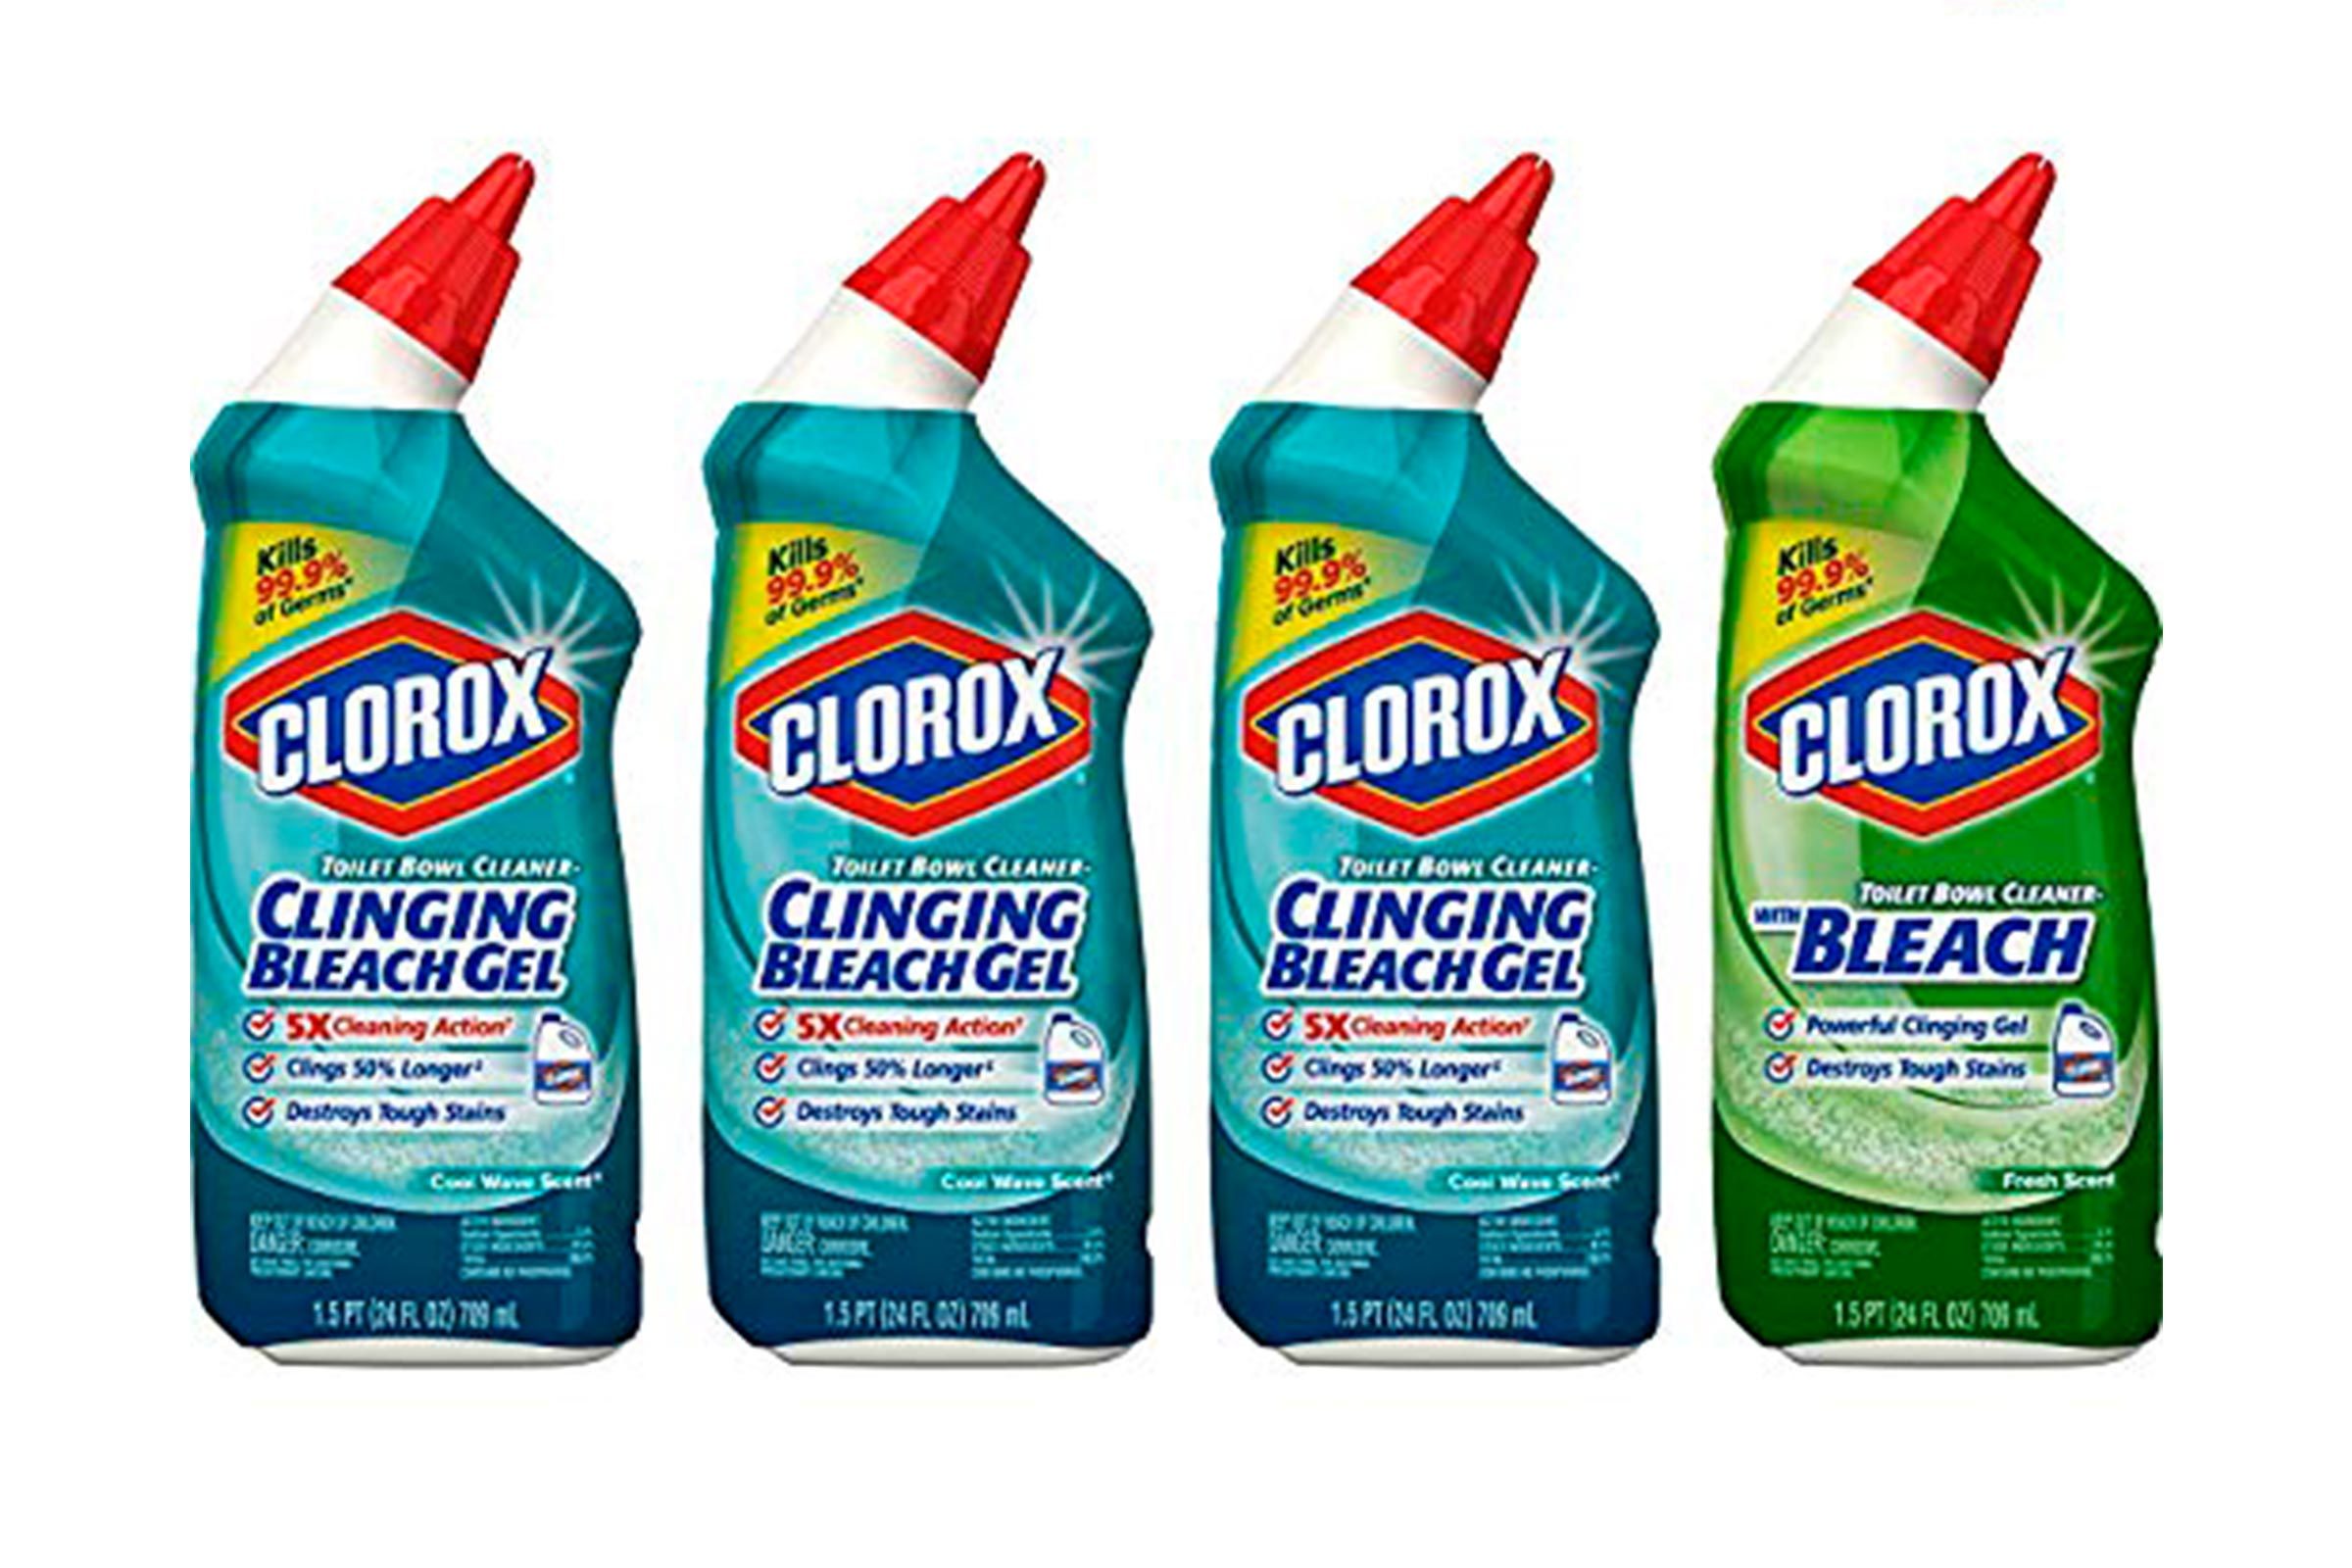 Cleaning Products Professional House Cleaners Always Buy